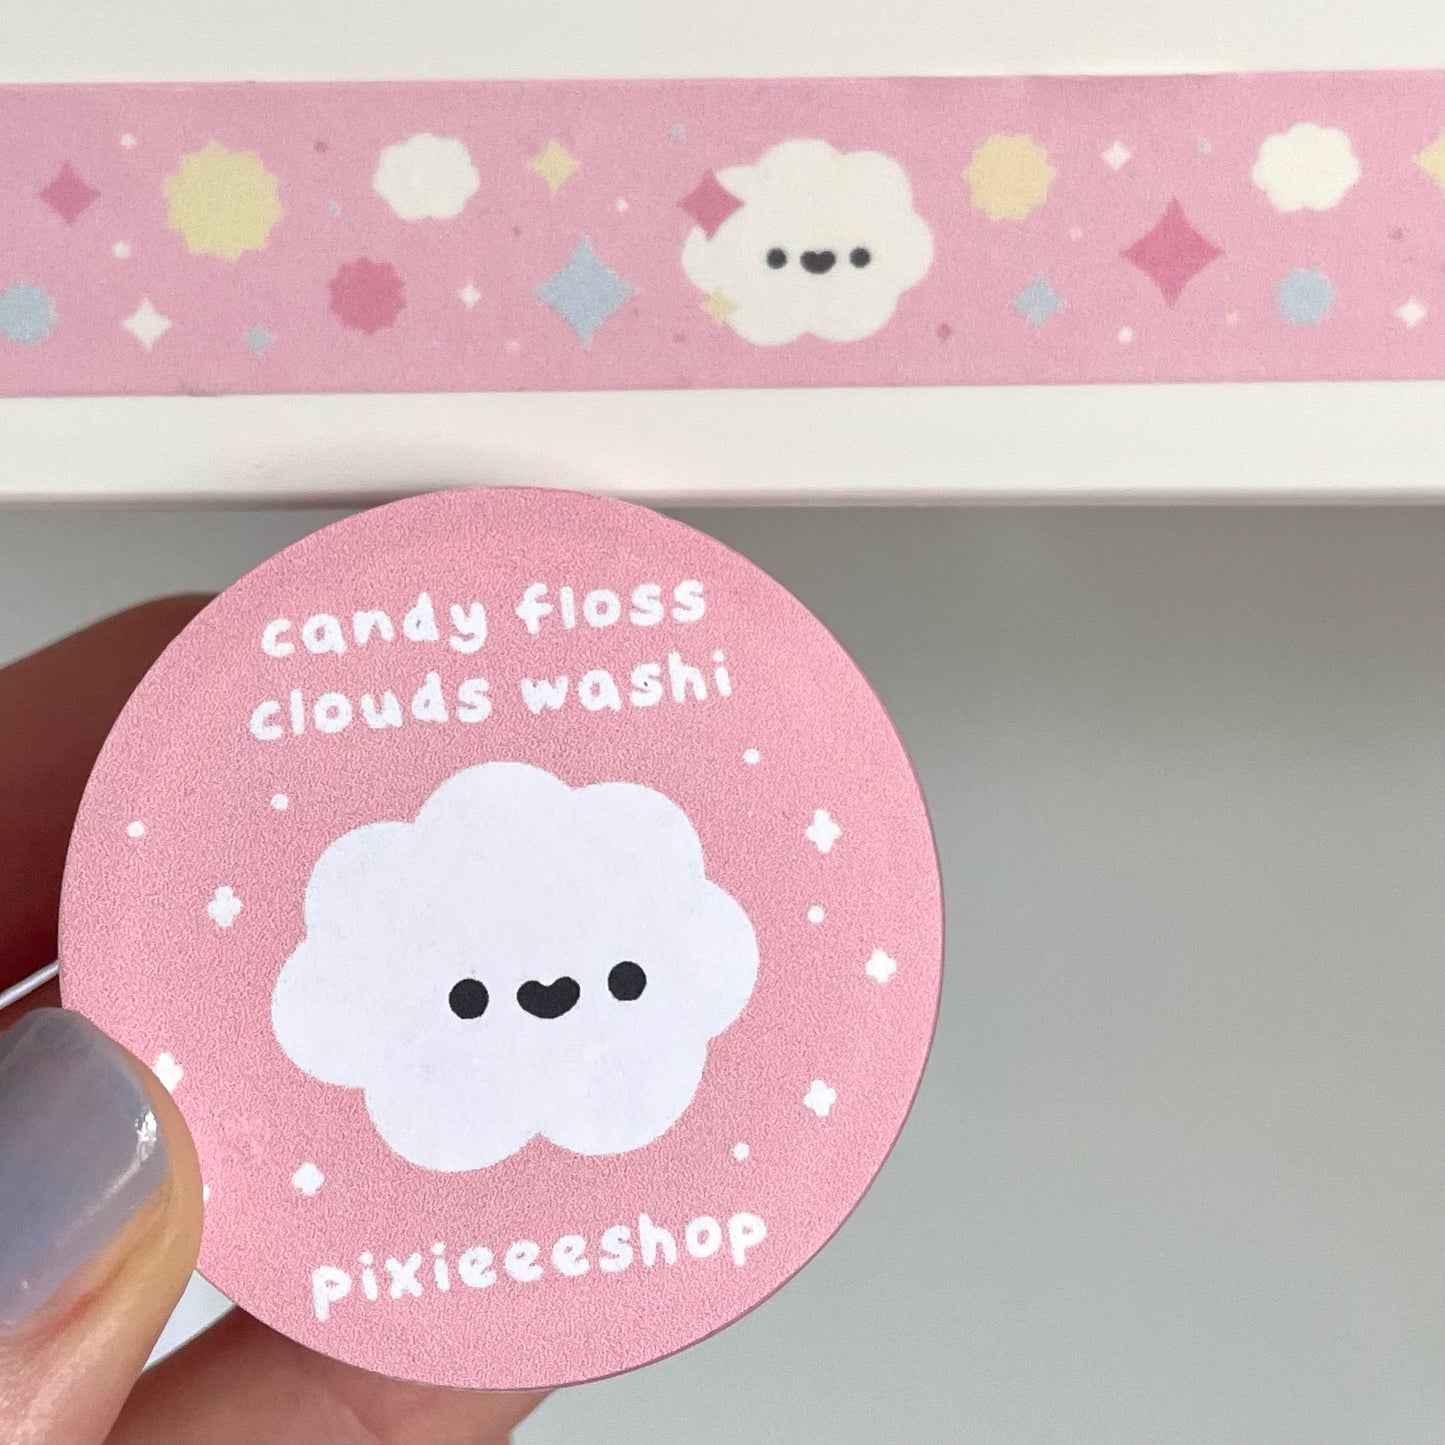 Candy Floss Clouds Washi Tape